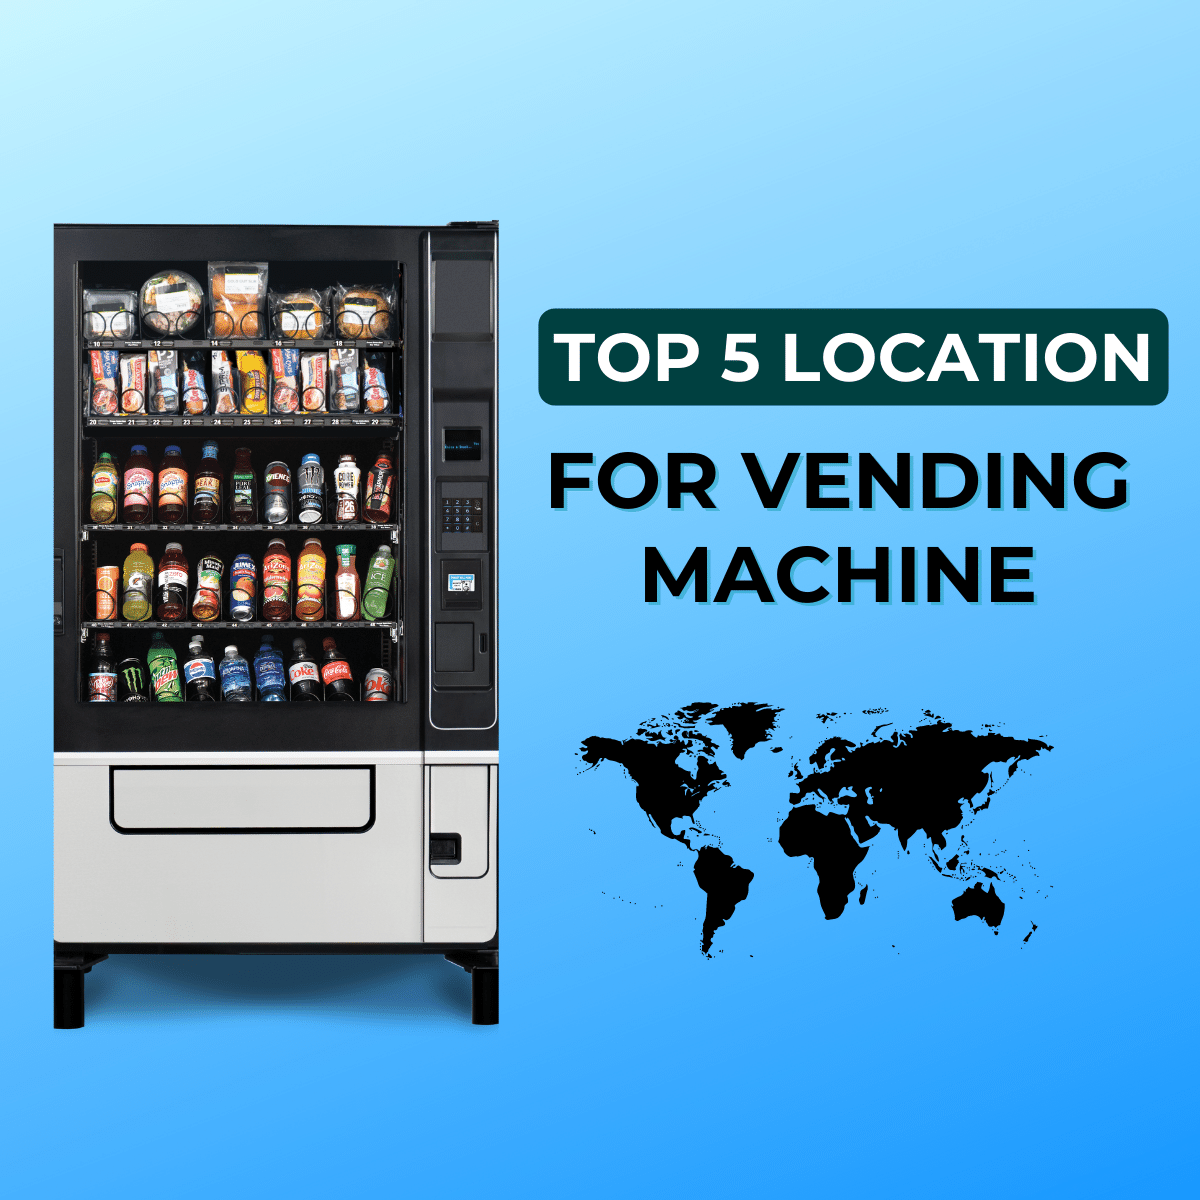 THE TOP 5 LOCATIONS FOR VENDING MACHINE TRENDS FOR 2023